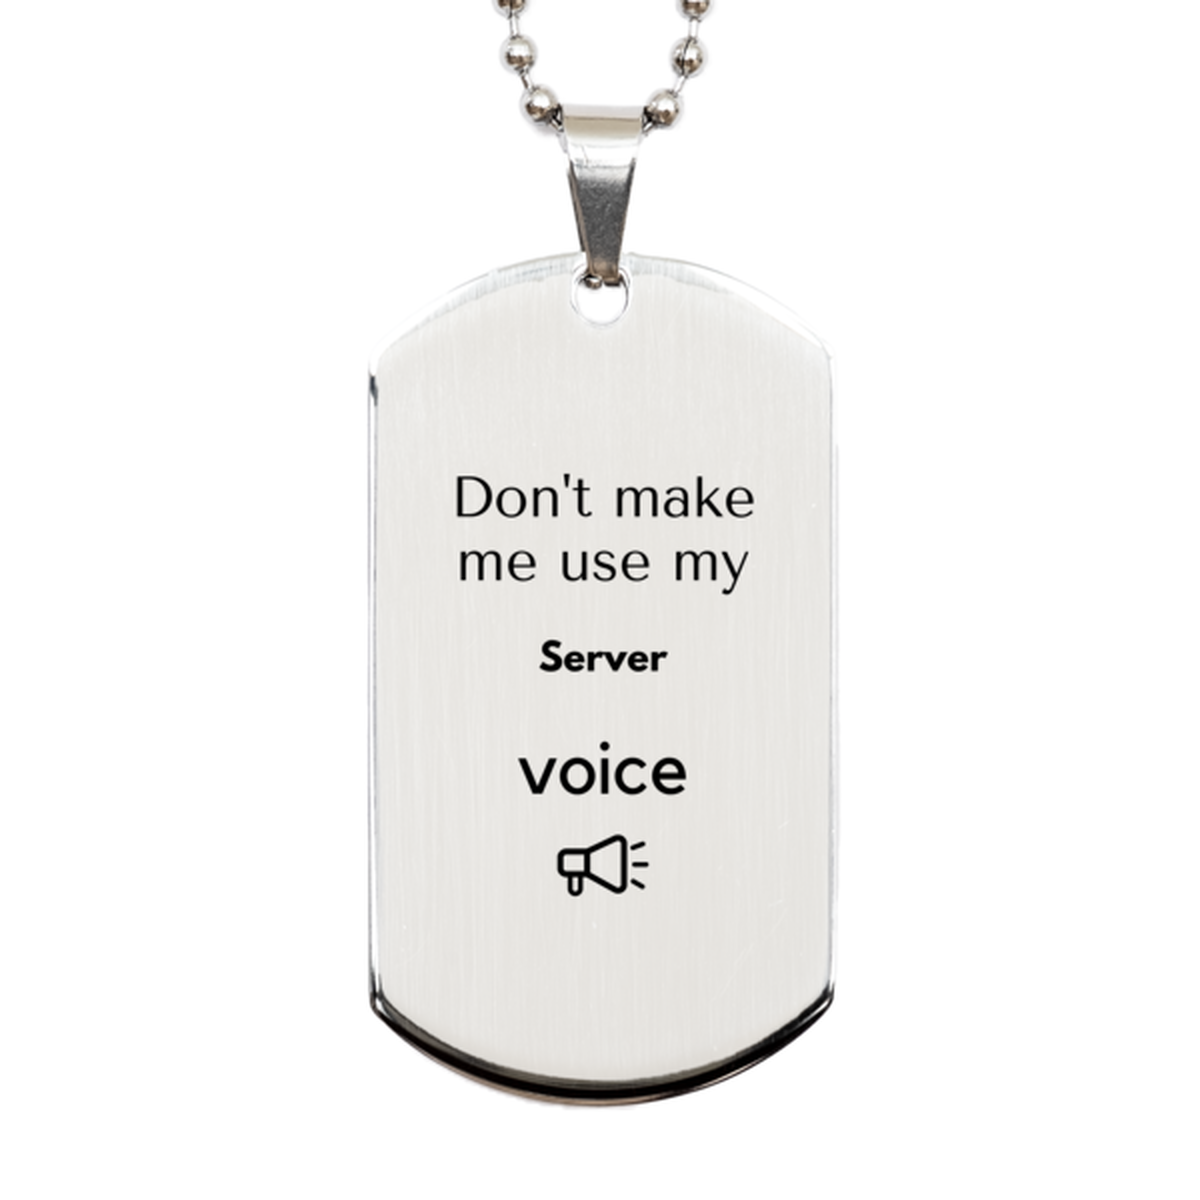 Don't make me use my Server voice, Sarcasm Server Gifts, Christmas Server Silver Dog Tag Birthday Unique Gifts For Server Coworkers, Men, Women, Colleague, Friends